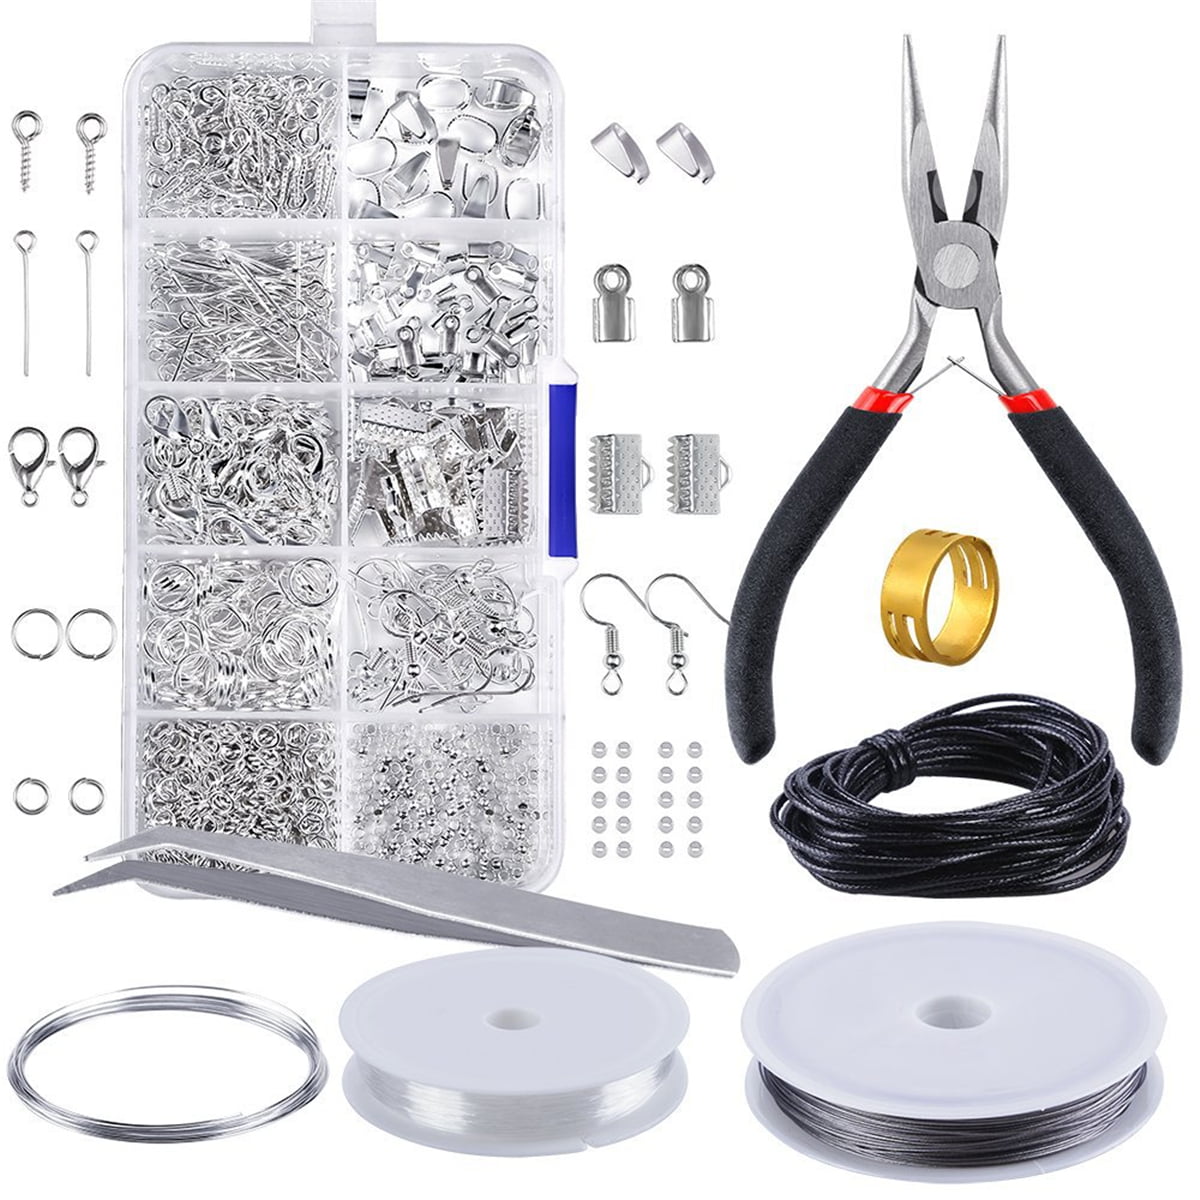 Teens Beads for Adults Silver Modda Earrings Jewelry Making Kit Women Necklaces Girls Beading Starter Kit All Needed Wire Jewellery Making Supplies Red Beginners to Make DIY Bracelets